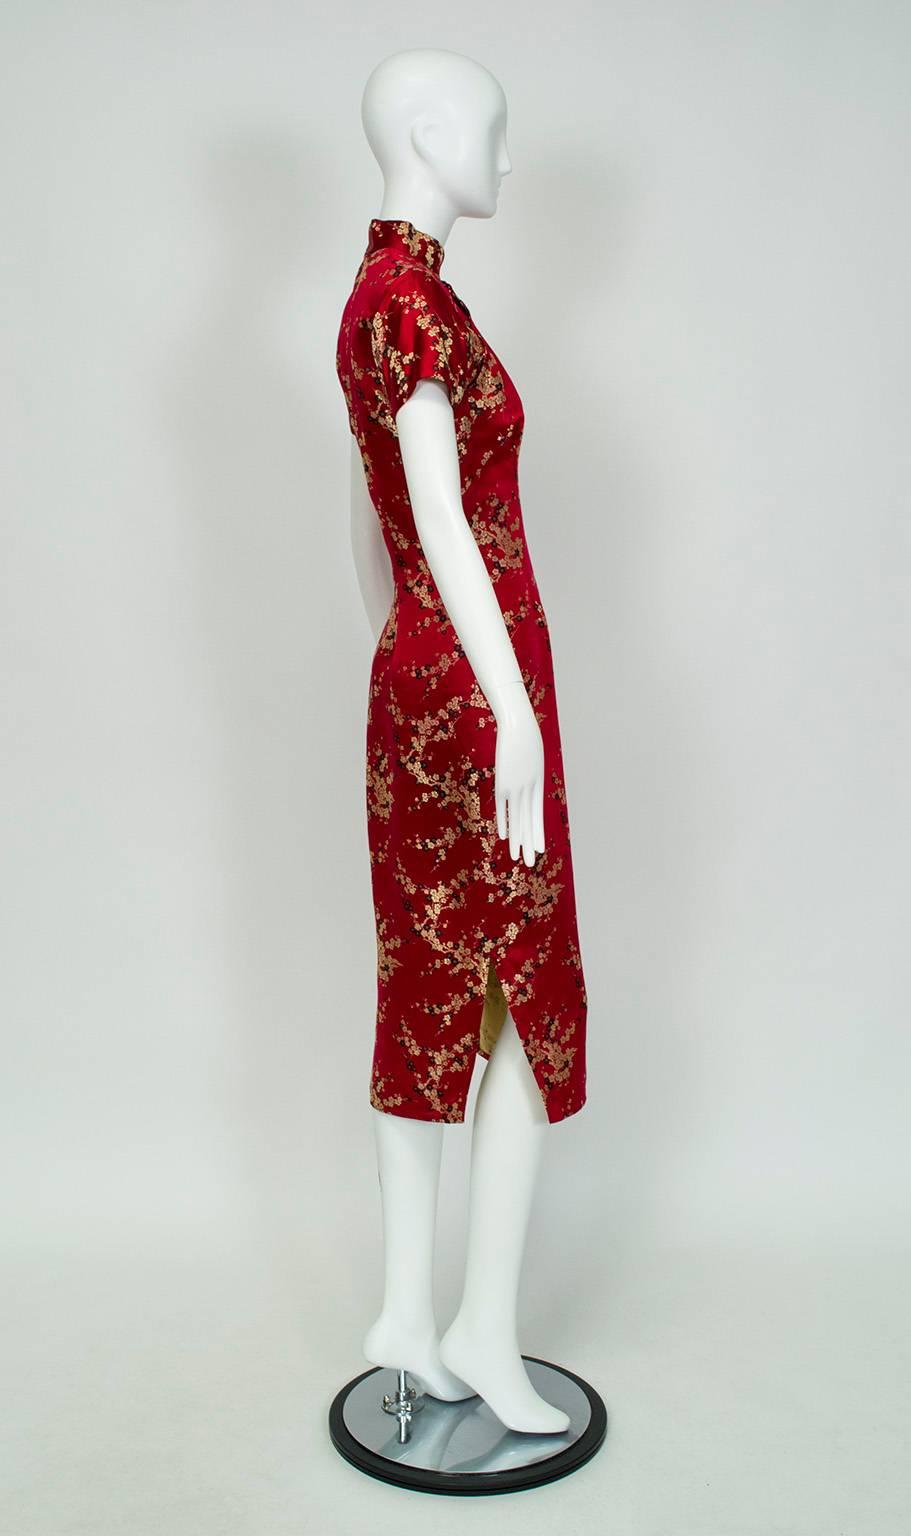 From the estate of a WWII nurse who traveled Asia (alone!) during her leave, this traffic-stopping dress was custom-made in Shanghai in the only color that counts: red brocade.  As close as it gets to starring in a war-era film noir; best paired